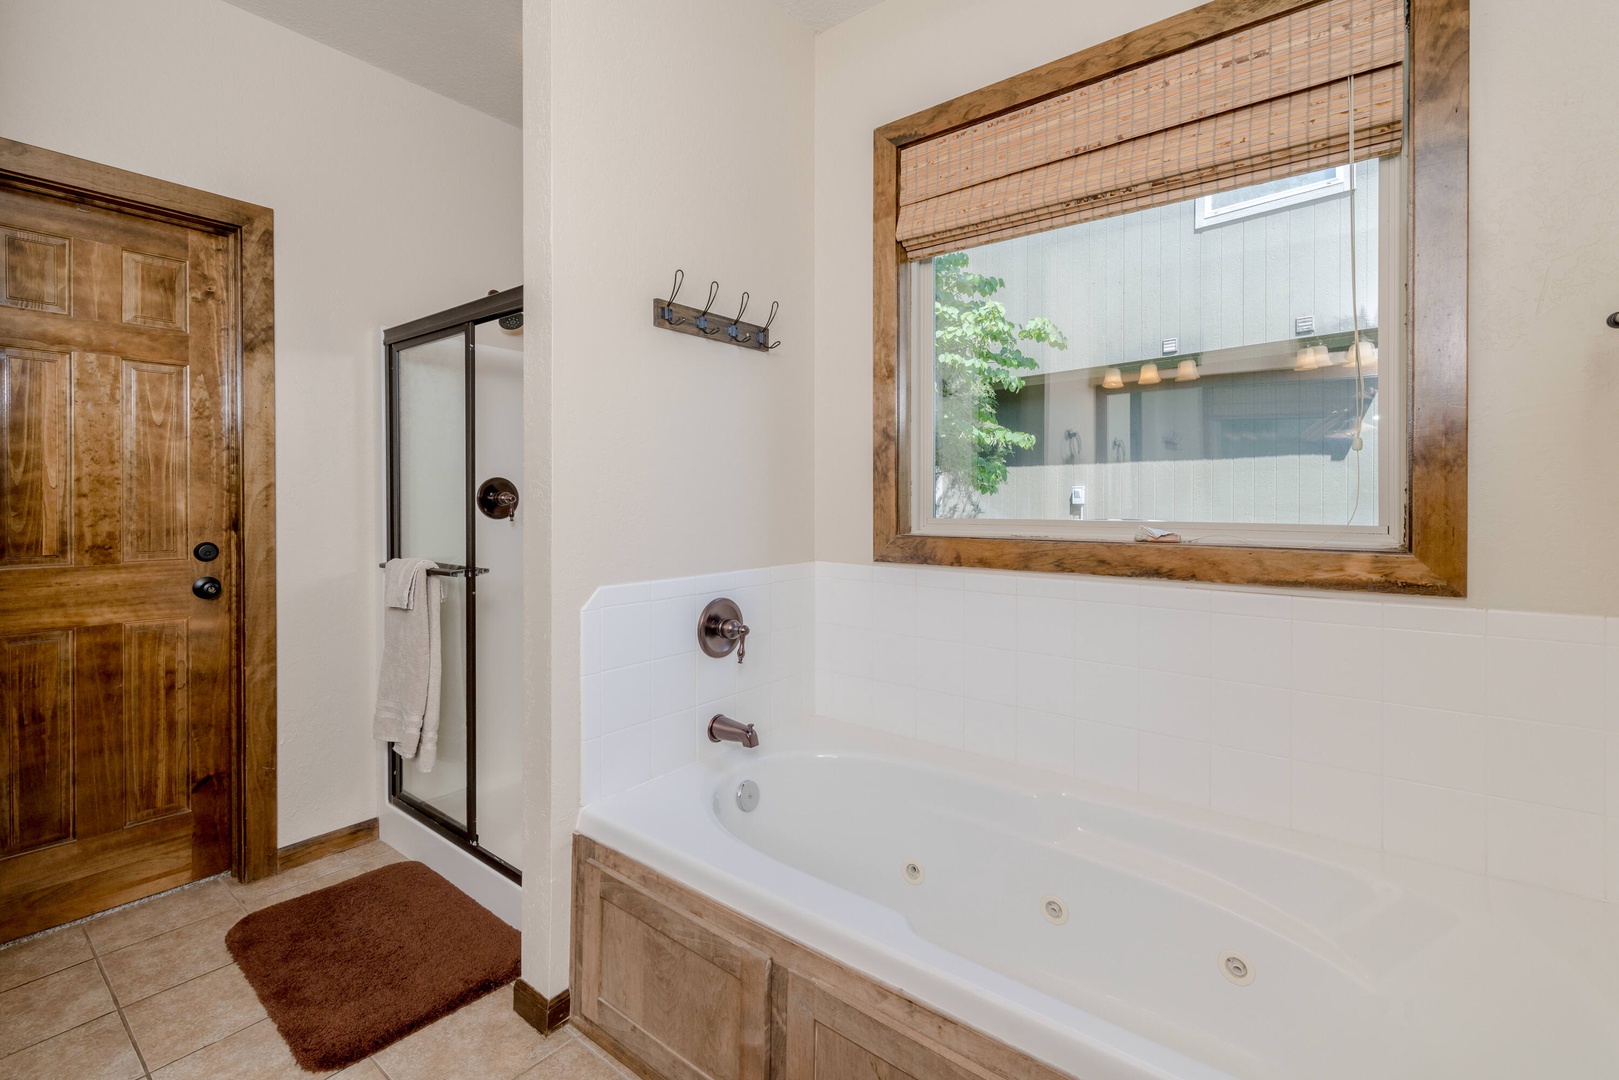 Private en-suite with separate shower and tub